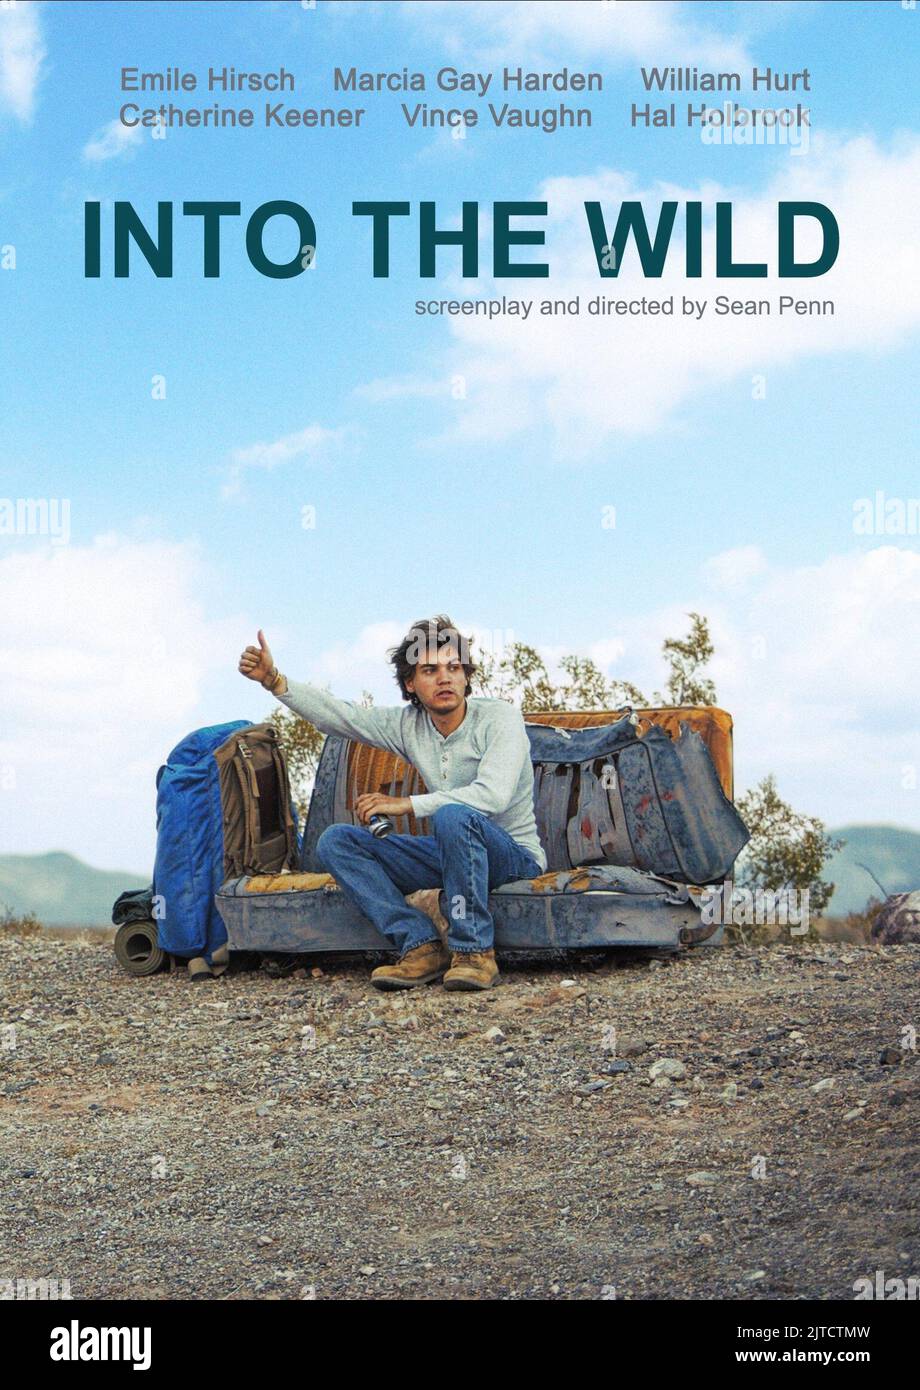 EMILE HIRSCH POSTER, INTO THE WILD, 2007 Stock Photo